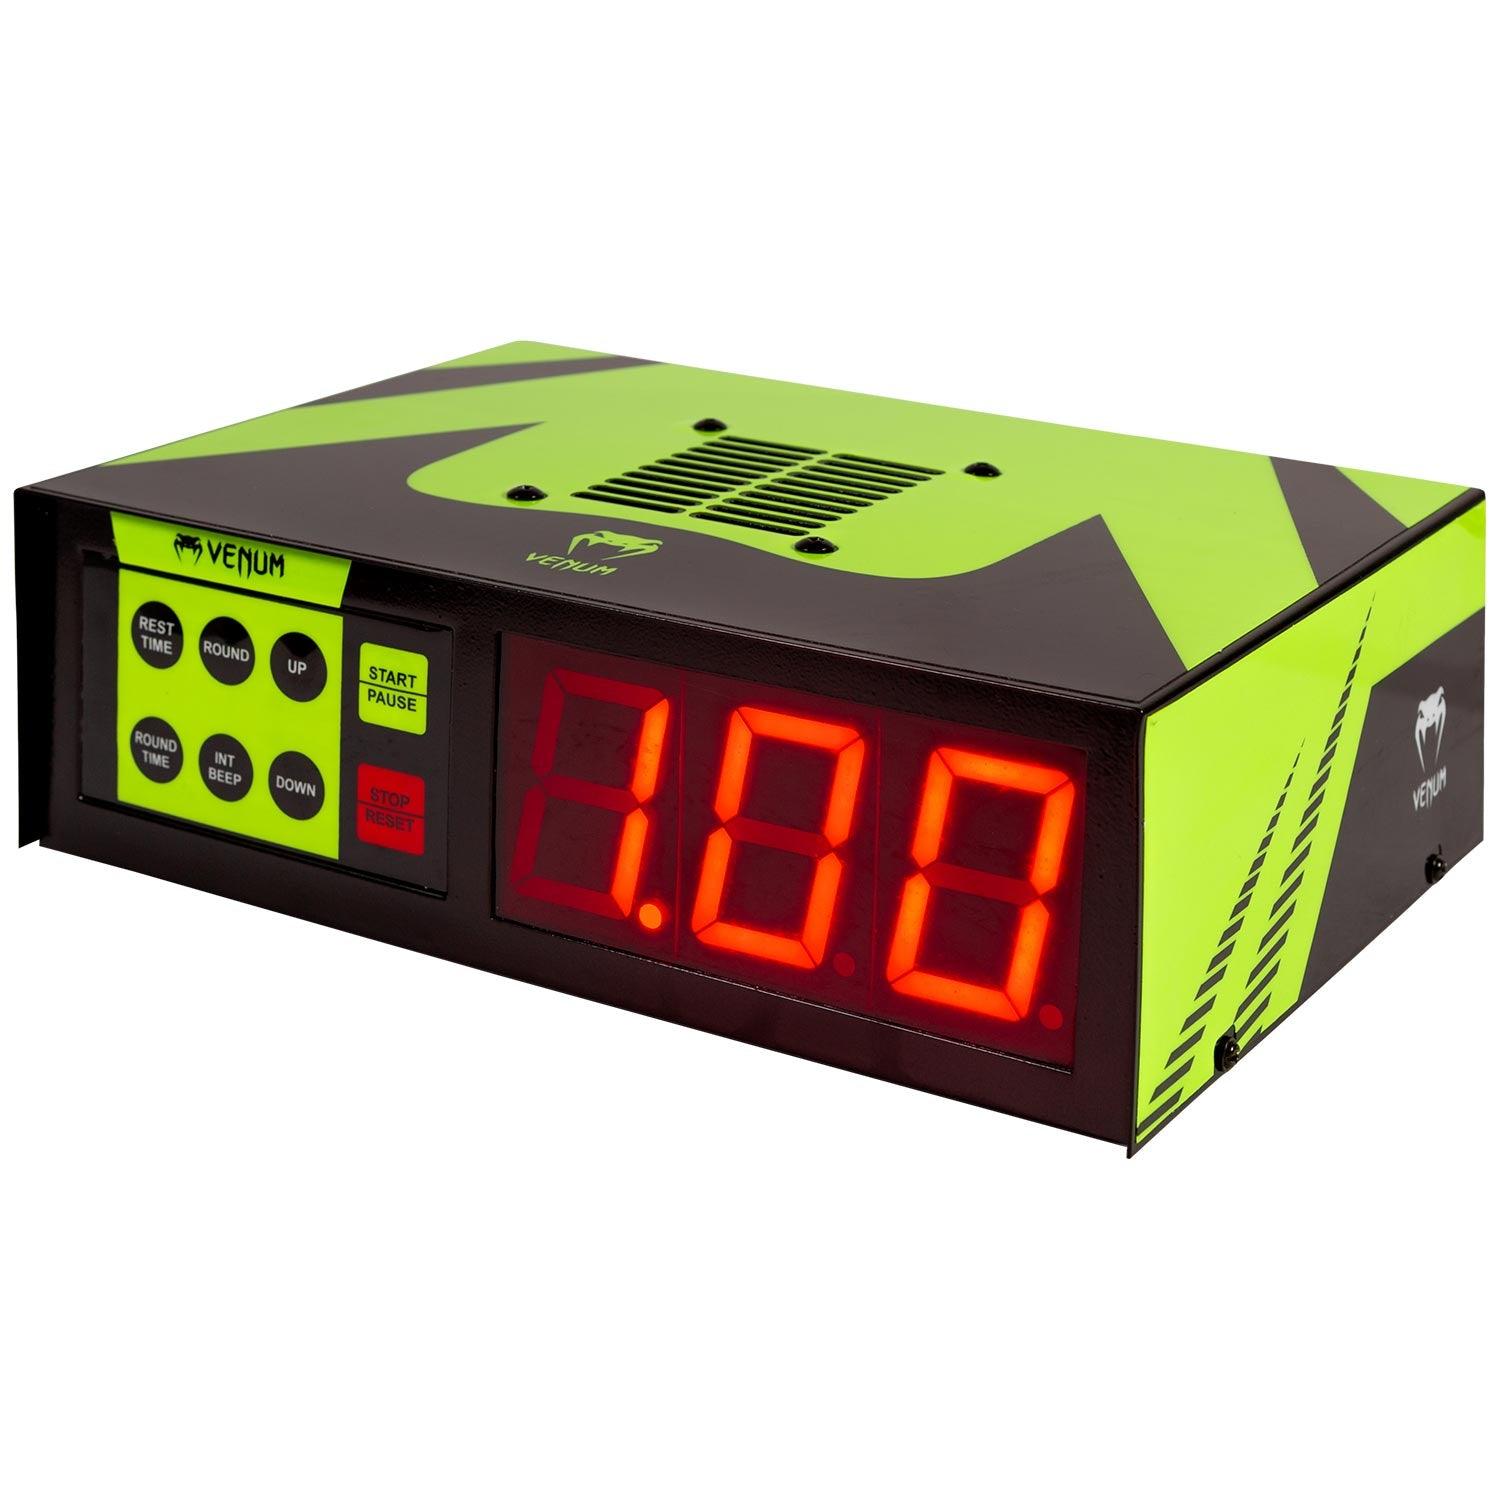 Venum Boxing Timer - Black/Yellow Picture 1